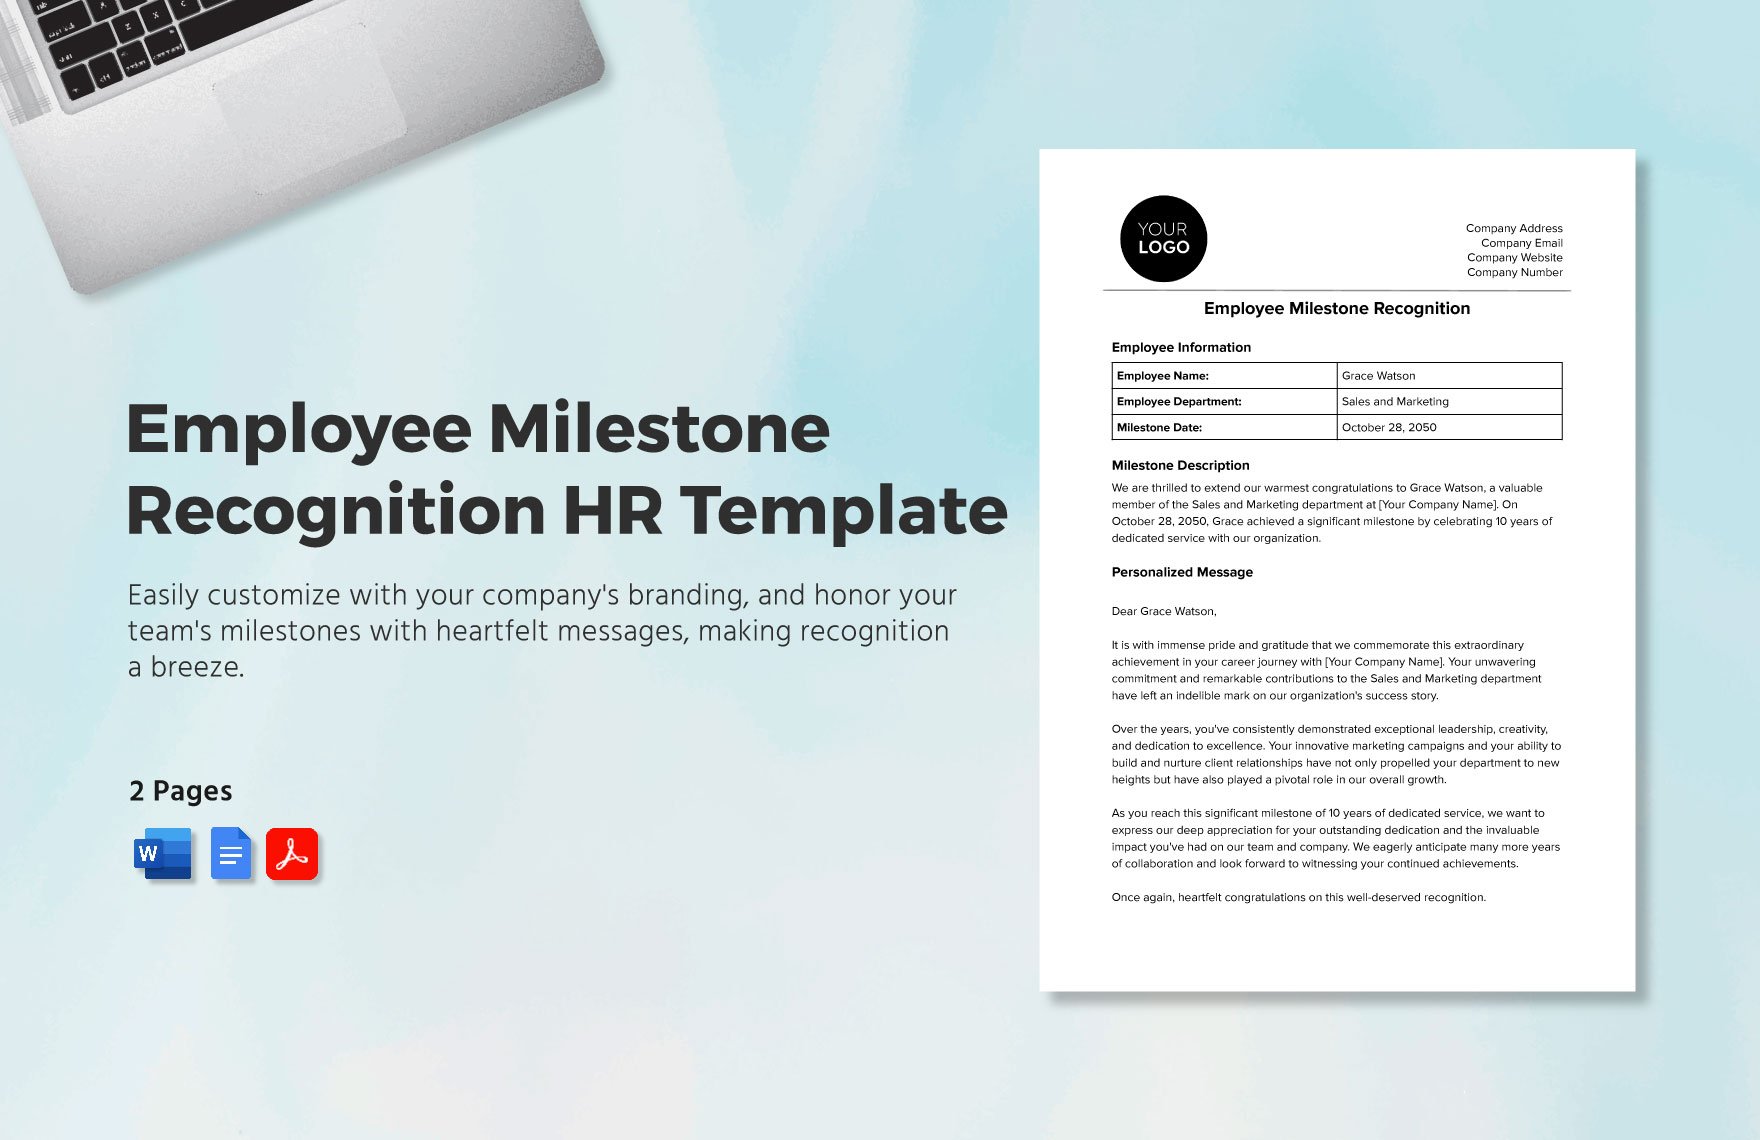 Employee Milestone Recognition HR Template in Word, Google Docs, PDF